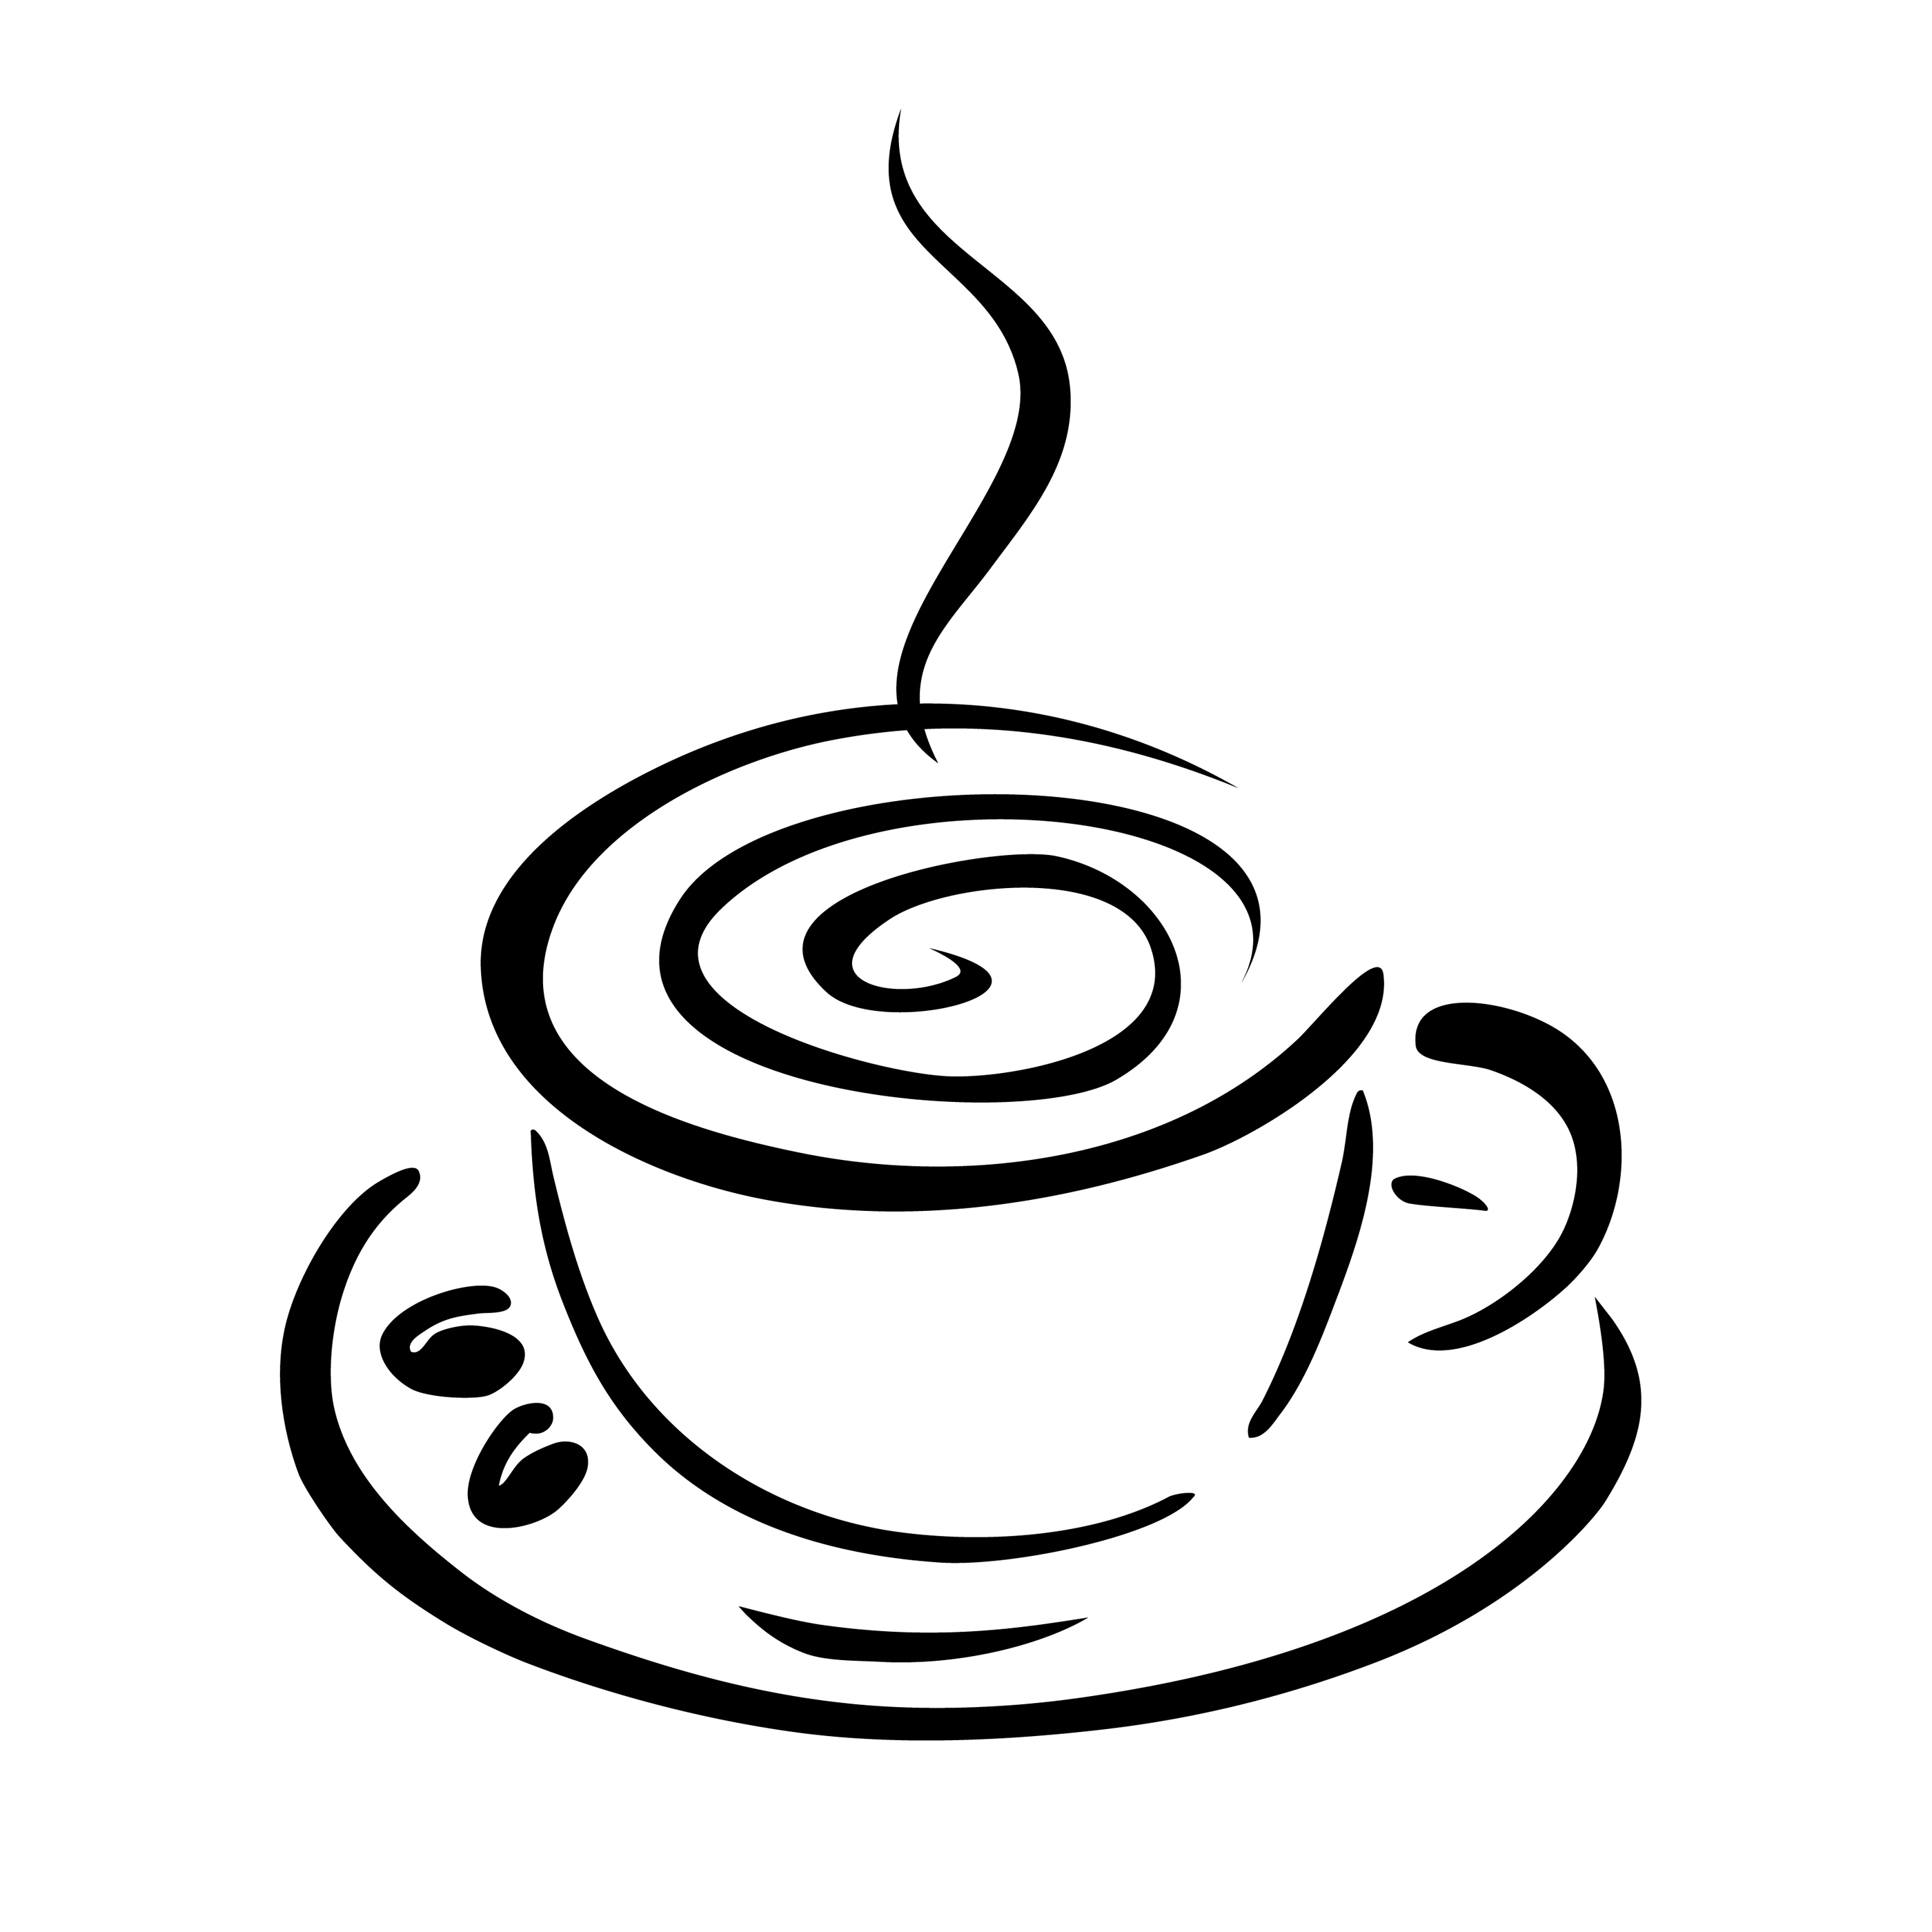 Coffee cup clip art black white free clipart images 2